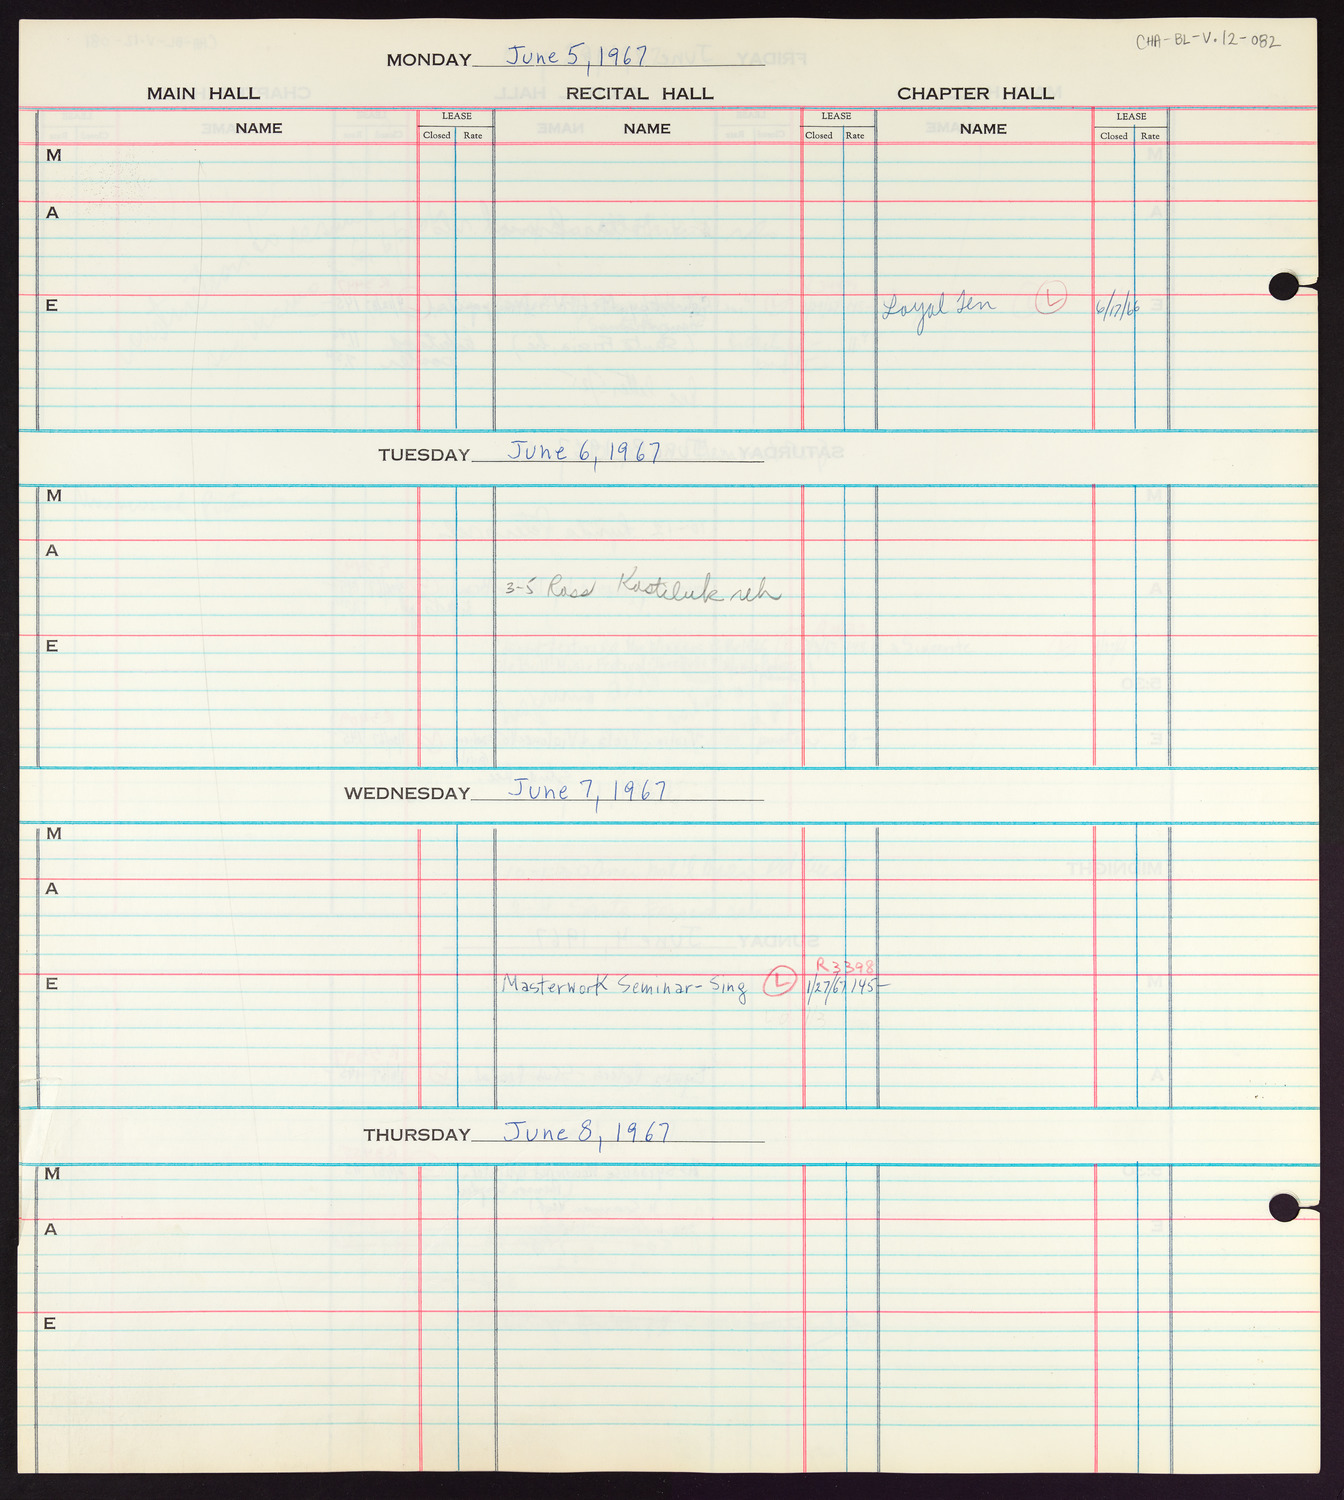 Carnegie Hall Booking Ledger, volume 12, page 82